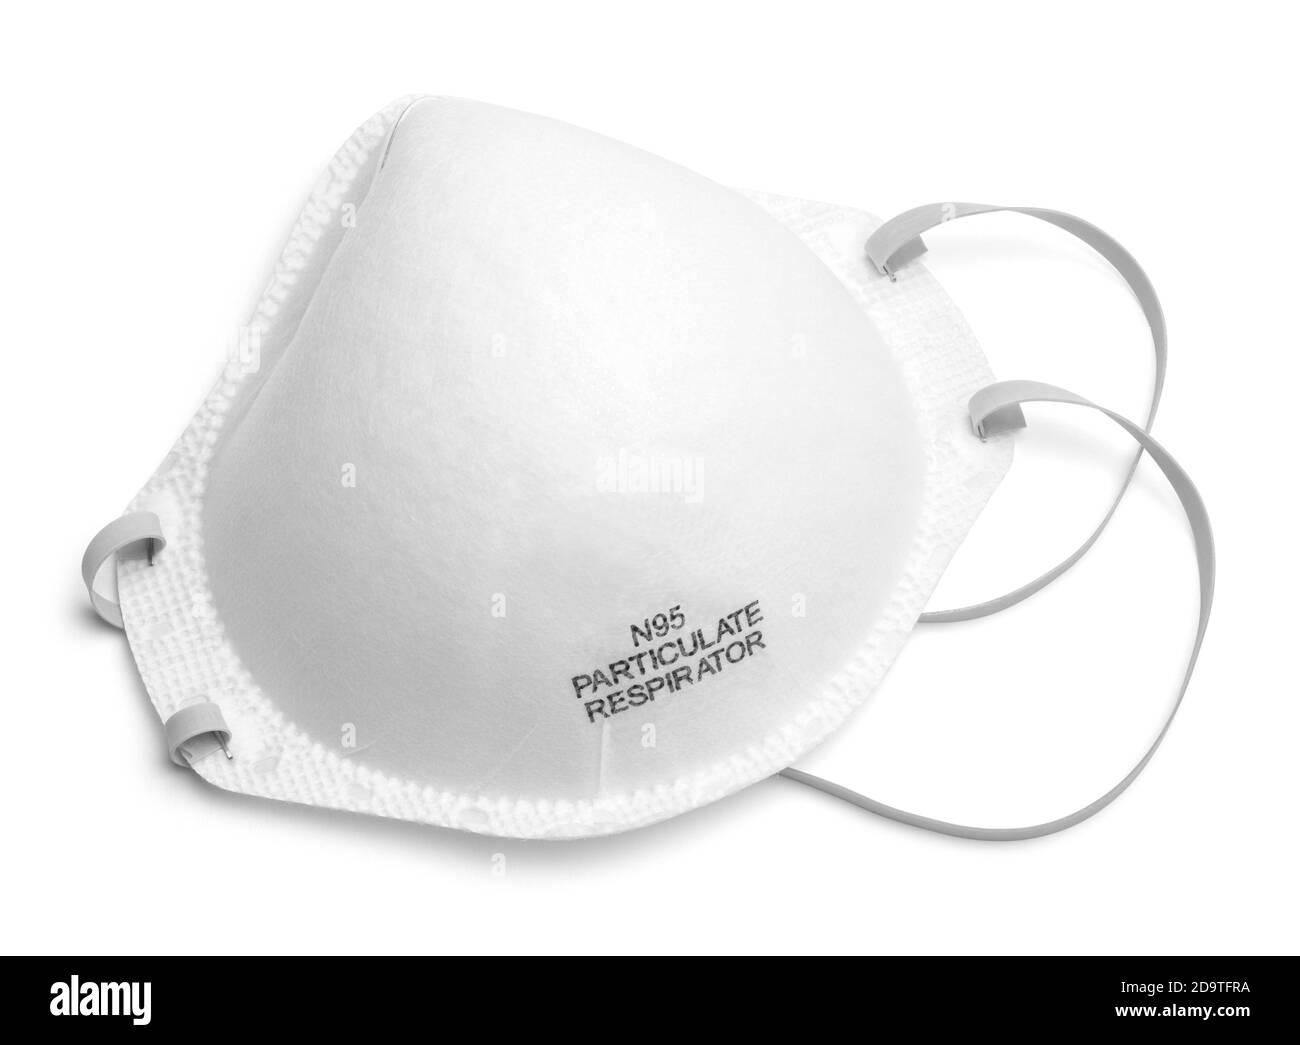 N95 Particulate Respirator Mask Top View Cut Out. Stock Photo